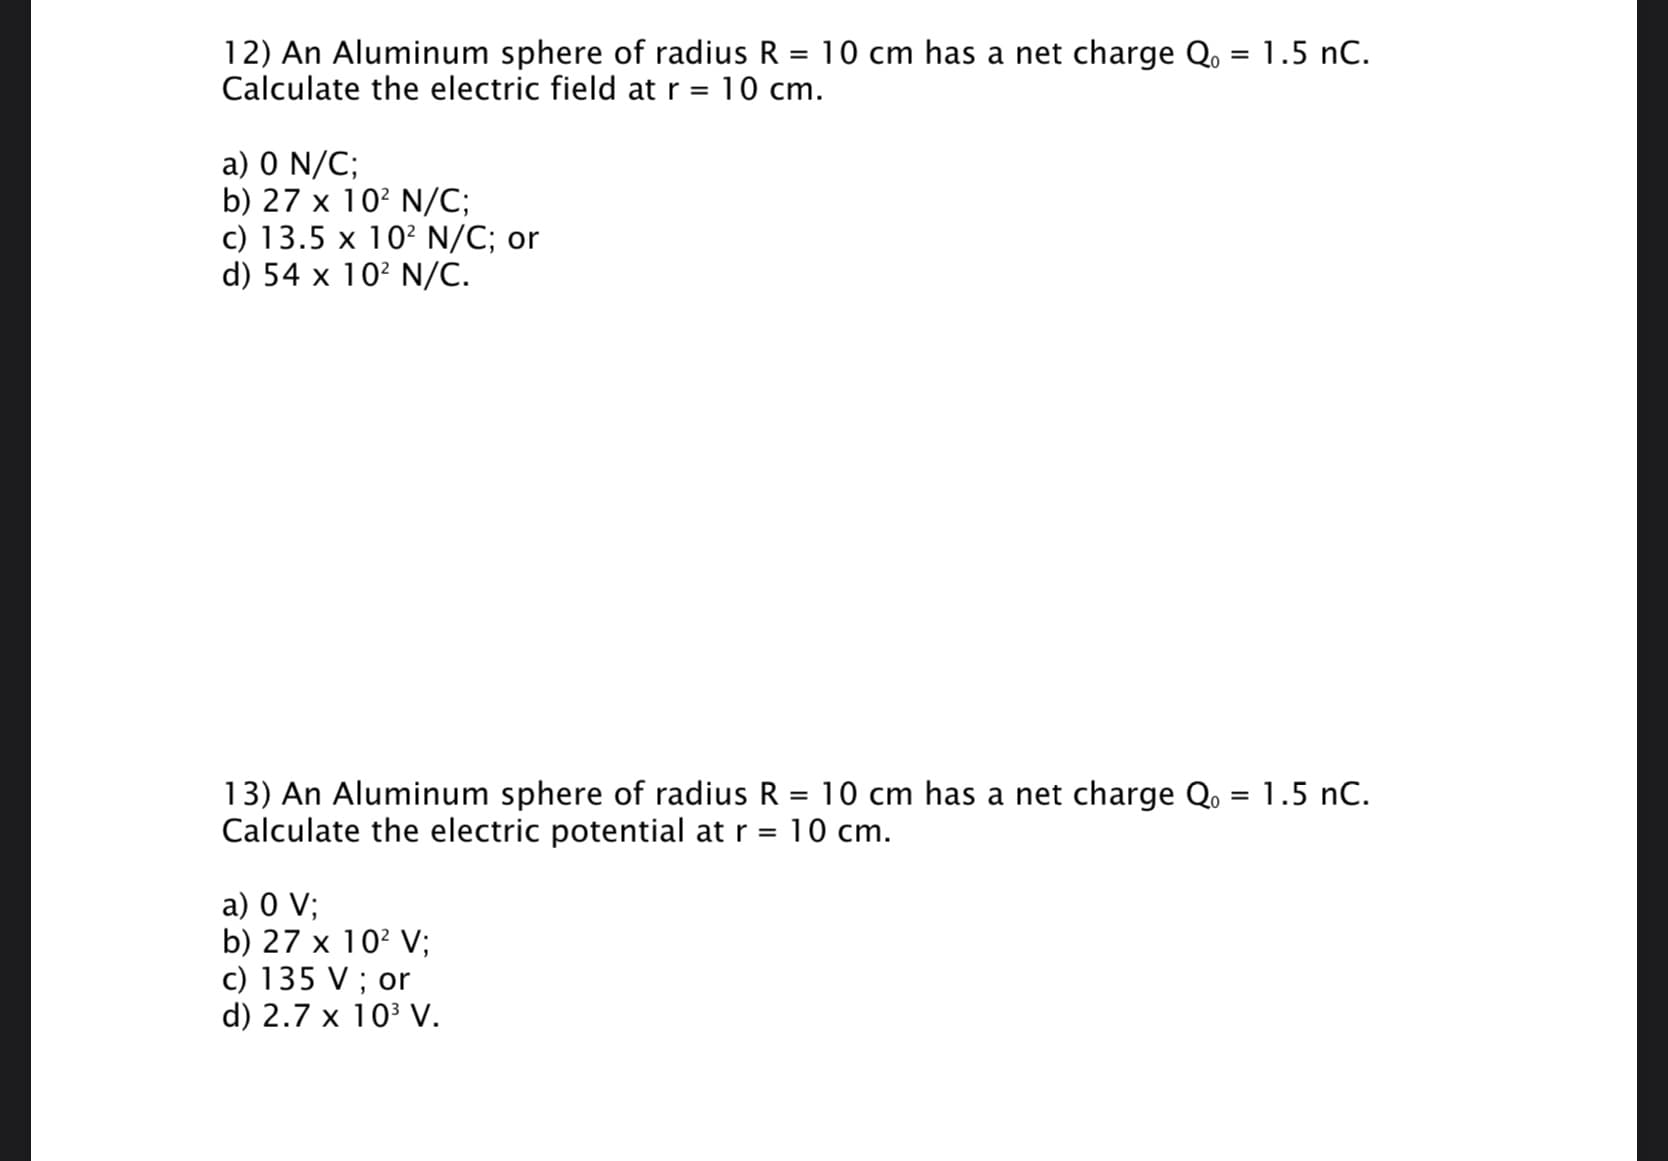 12) An Aluminum sphere of radius R = 10 cm has a net charge Q. = 1.5 nC.
Calculate the electric field at r =
%3D
10 cm.
a) 0 N/C;
b) 27 x 10? N/C;
c) 13.5 x 10? N/C; or
d) 54 x 10? N/C.
13) An Aluminum sphere of radius R = 10 cm has a net charge Q, = 1.5 nC.
Calculate the electric potential at r =
10 cm.
a) 0 V;
b) 27 x 10? V;
c) 135 V ; or
d) 2.7 x 103 V.
